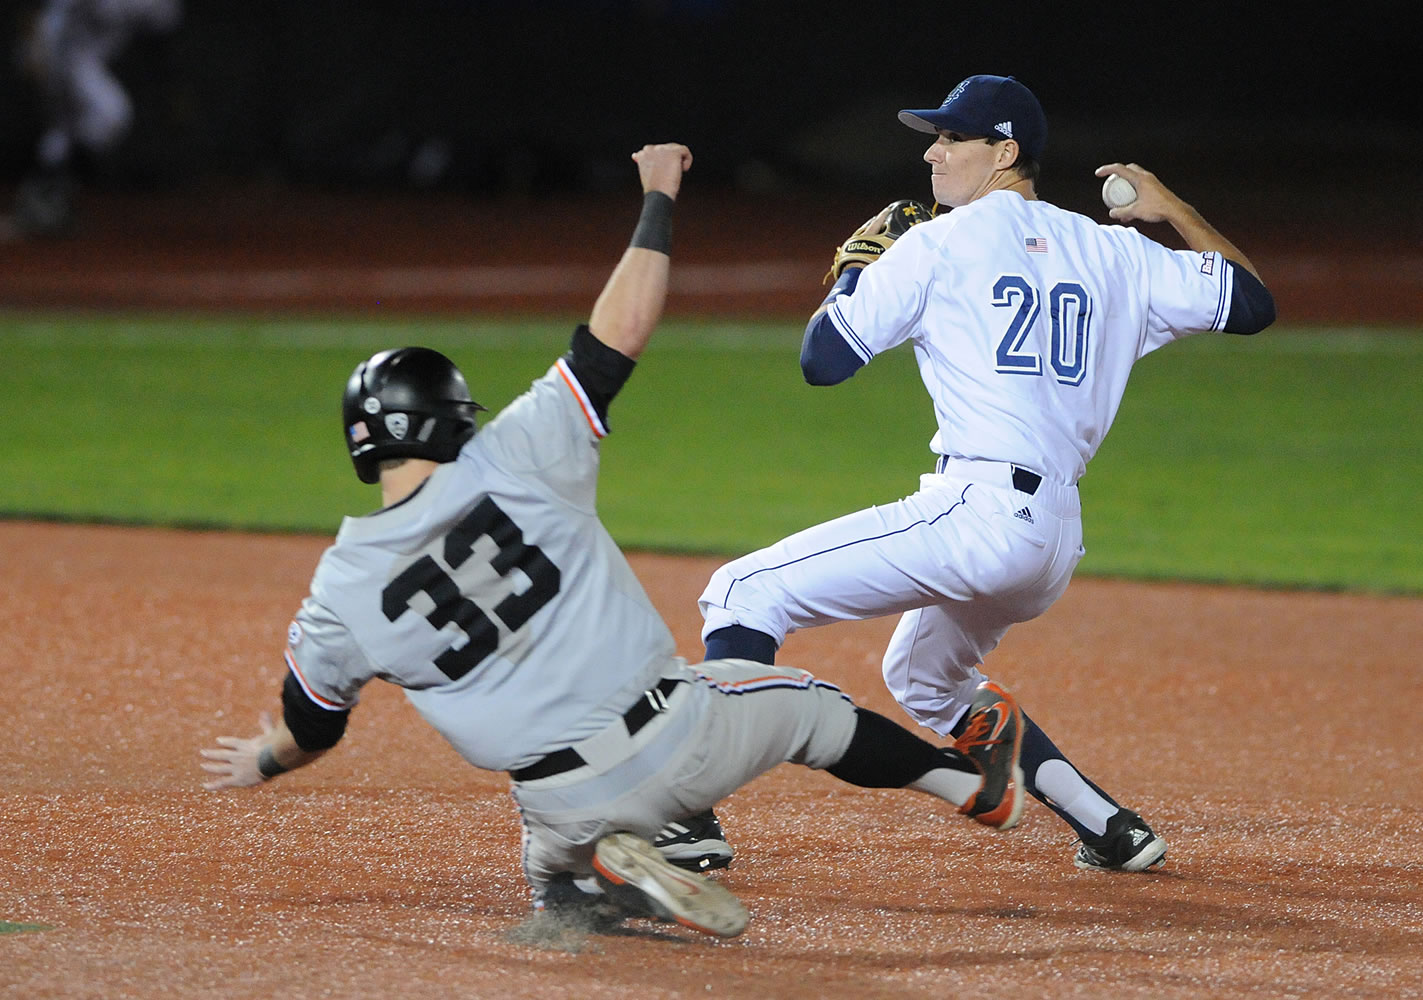 UC Irvine's John Brontsema turns a double play over Oregon State's Logan Ice to win the NCAA college baseball regional tournament in Corvallis, Ore., Monday, June 2, 2014.